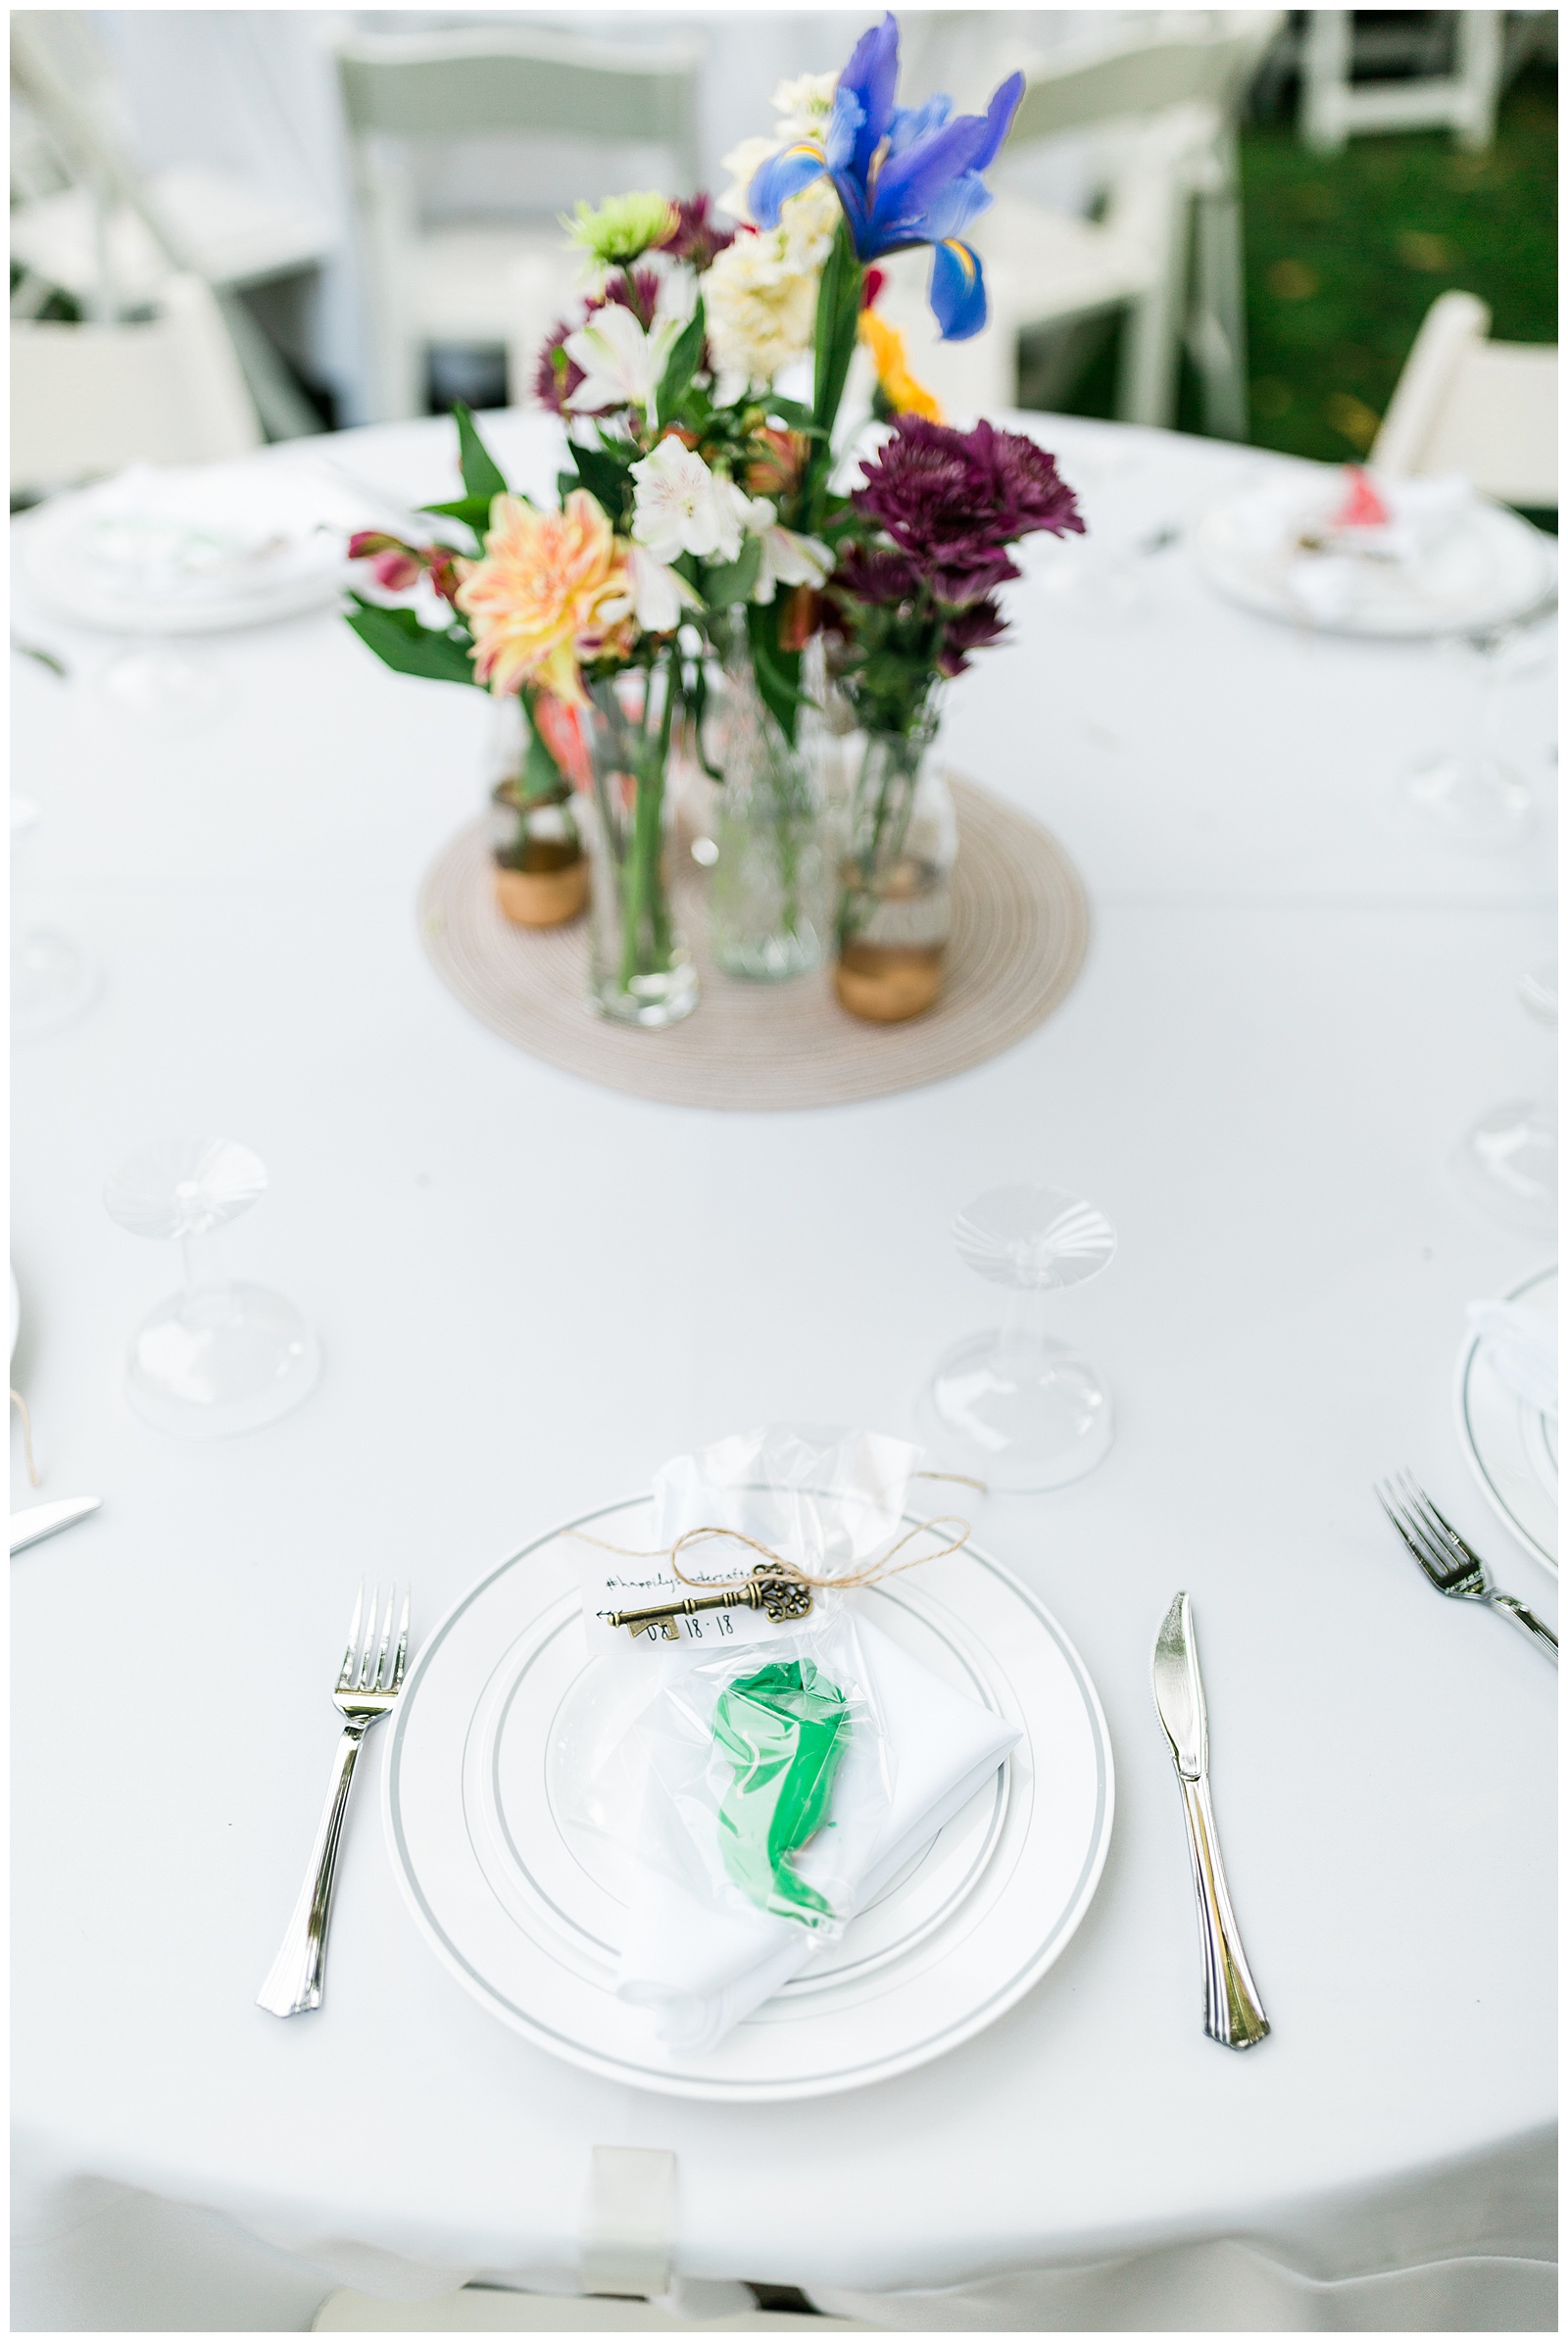 white table cloth with bright colored wedding decor and a chili pepper cookie